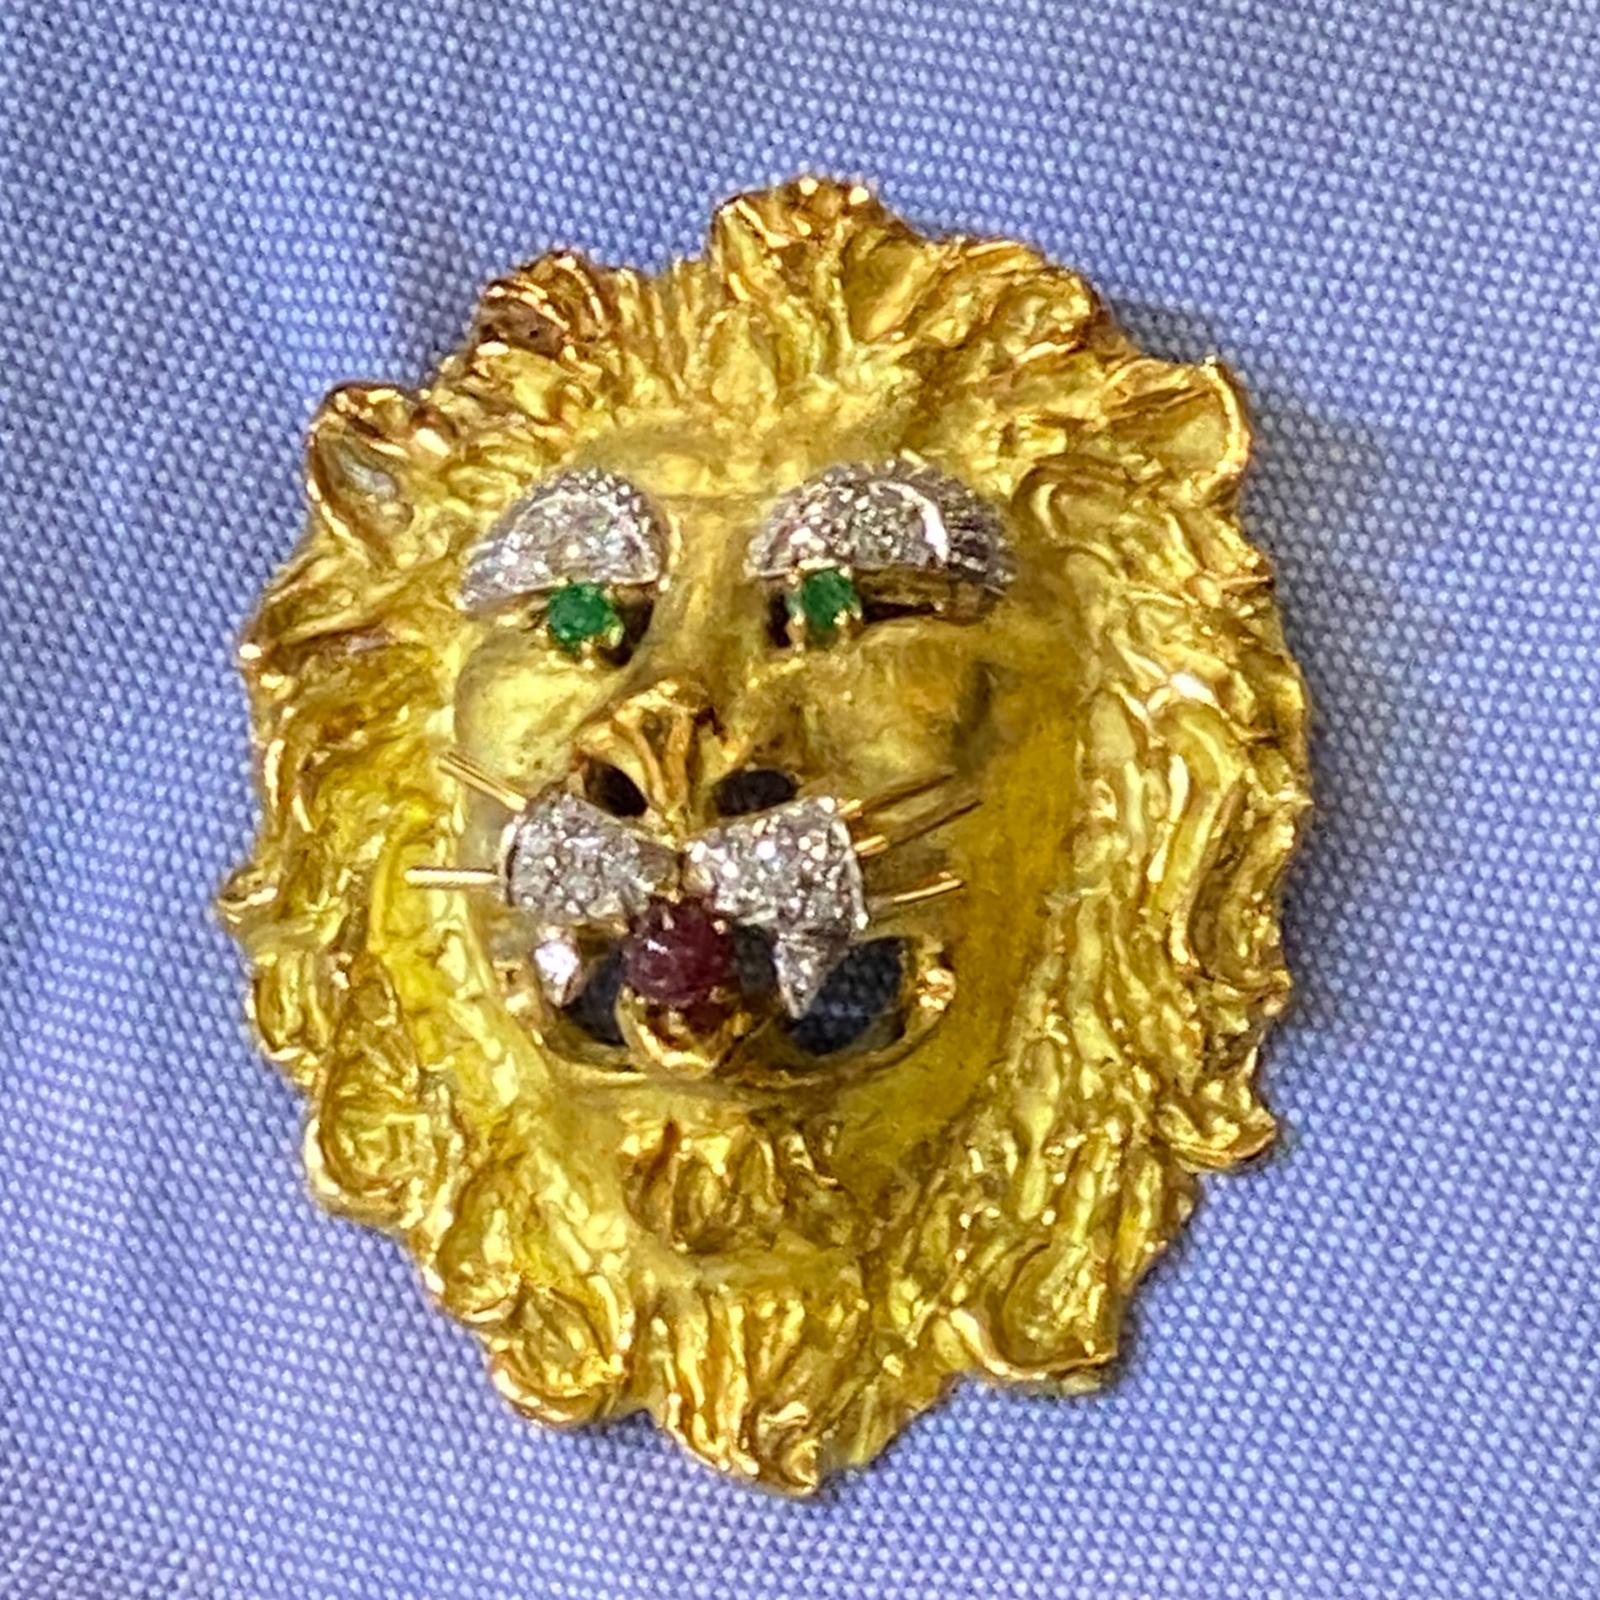 Vintage Lion's Head Pendant/Piin, by Hammerman Brothers, is fashioned in 18 karat yellow gold. The piece can be worn as a pendant or pin, and features diamonds, emerald eyes, and ruby mouth. The 23 round brilliant cut diamonds weigh approximatel .50